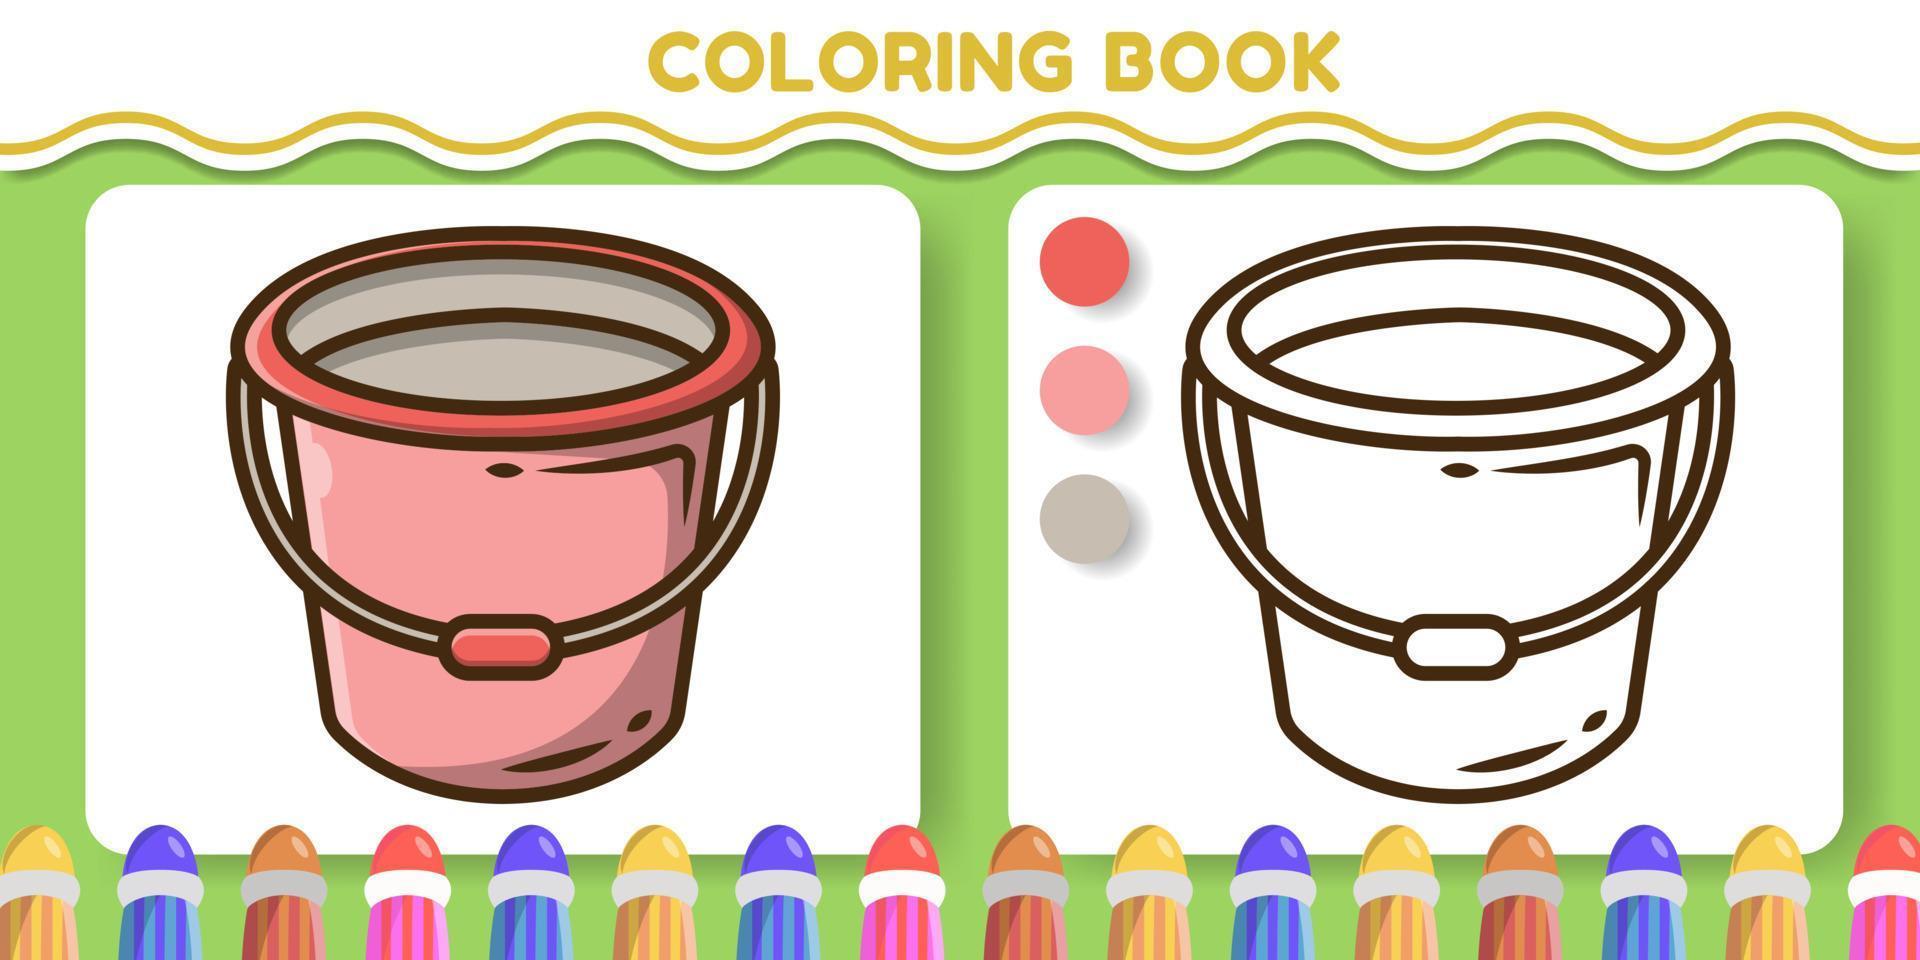 Colorful bucket hand drawn cartoon doodle coloring book for kids vector